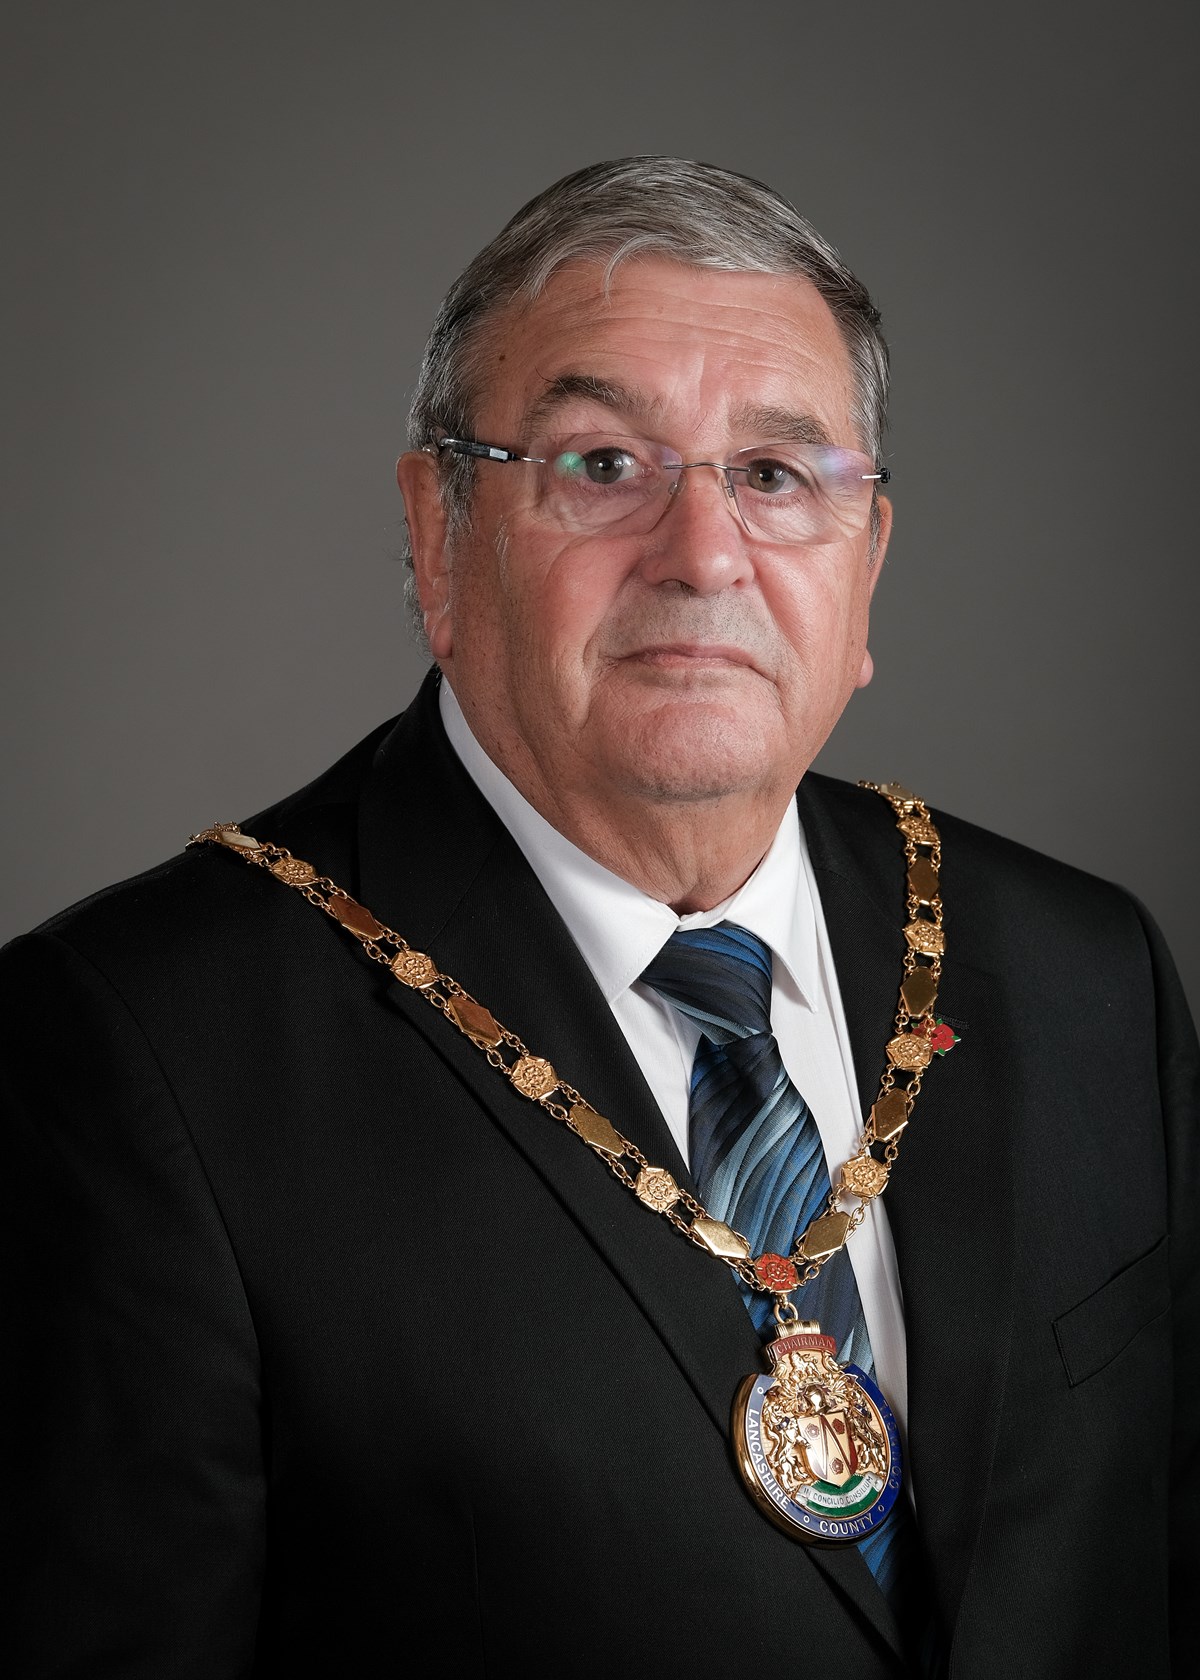 County council chairman 2021 to 2022 - County Councillor Barrie Yates